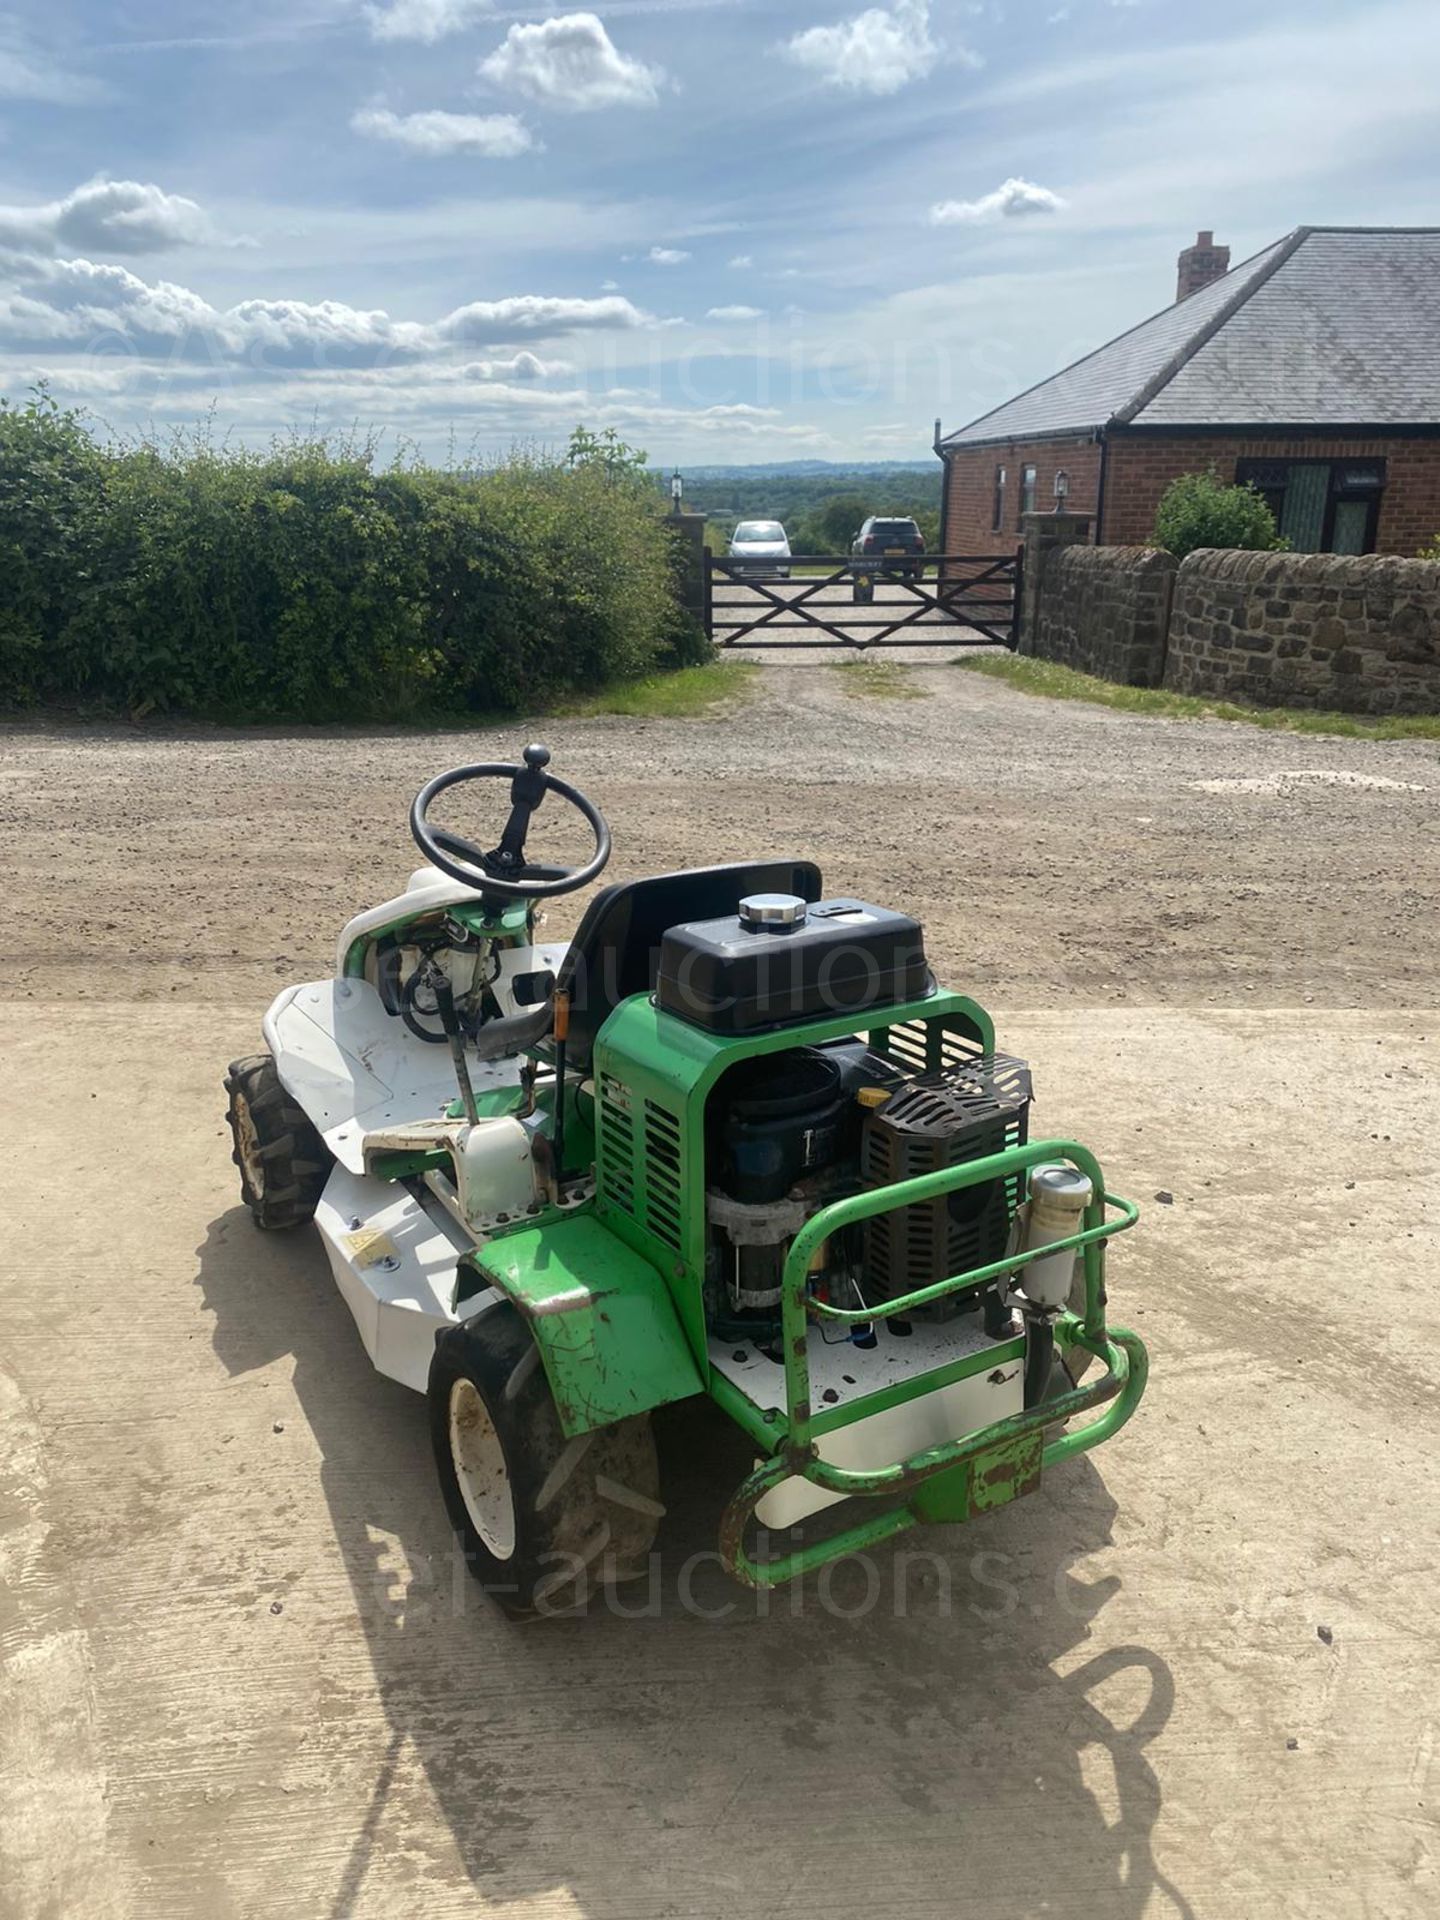 ETESIA ATTILA 85 BANK MOWER, STARTS AND RUNS, HOURS ARE SHOWING 554 *NO VAT* - Image 8 of 12